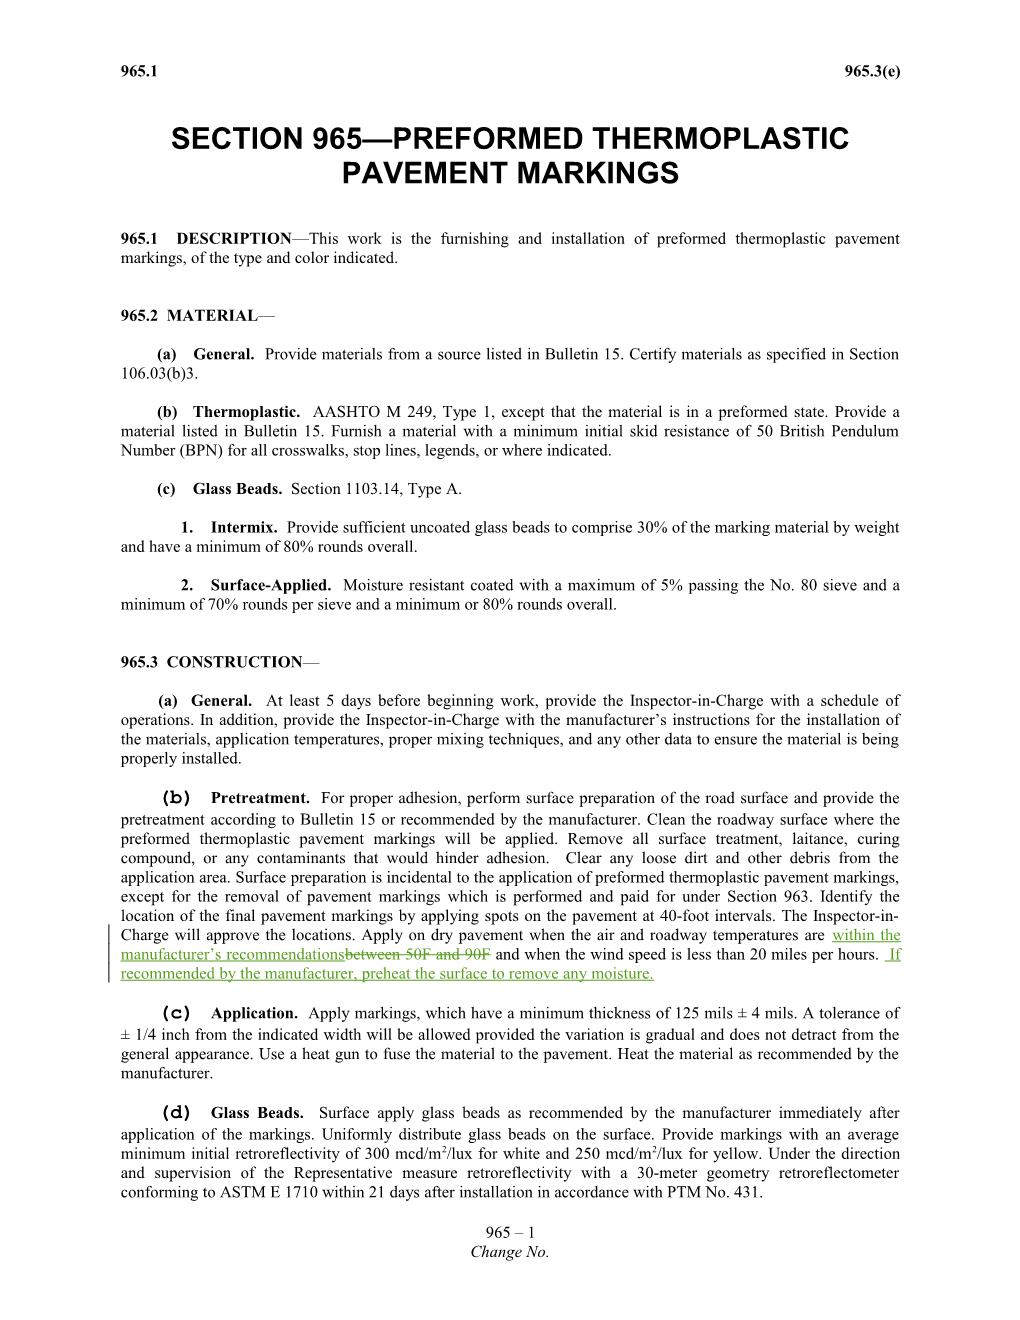 Section 965 Preformed Thermoplastic Pavement Markings